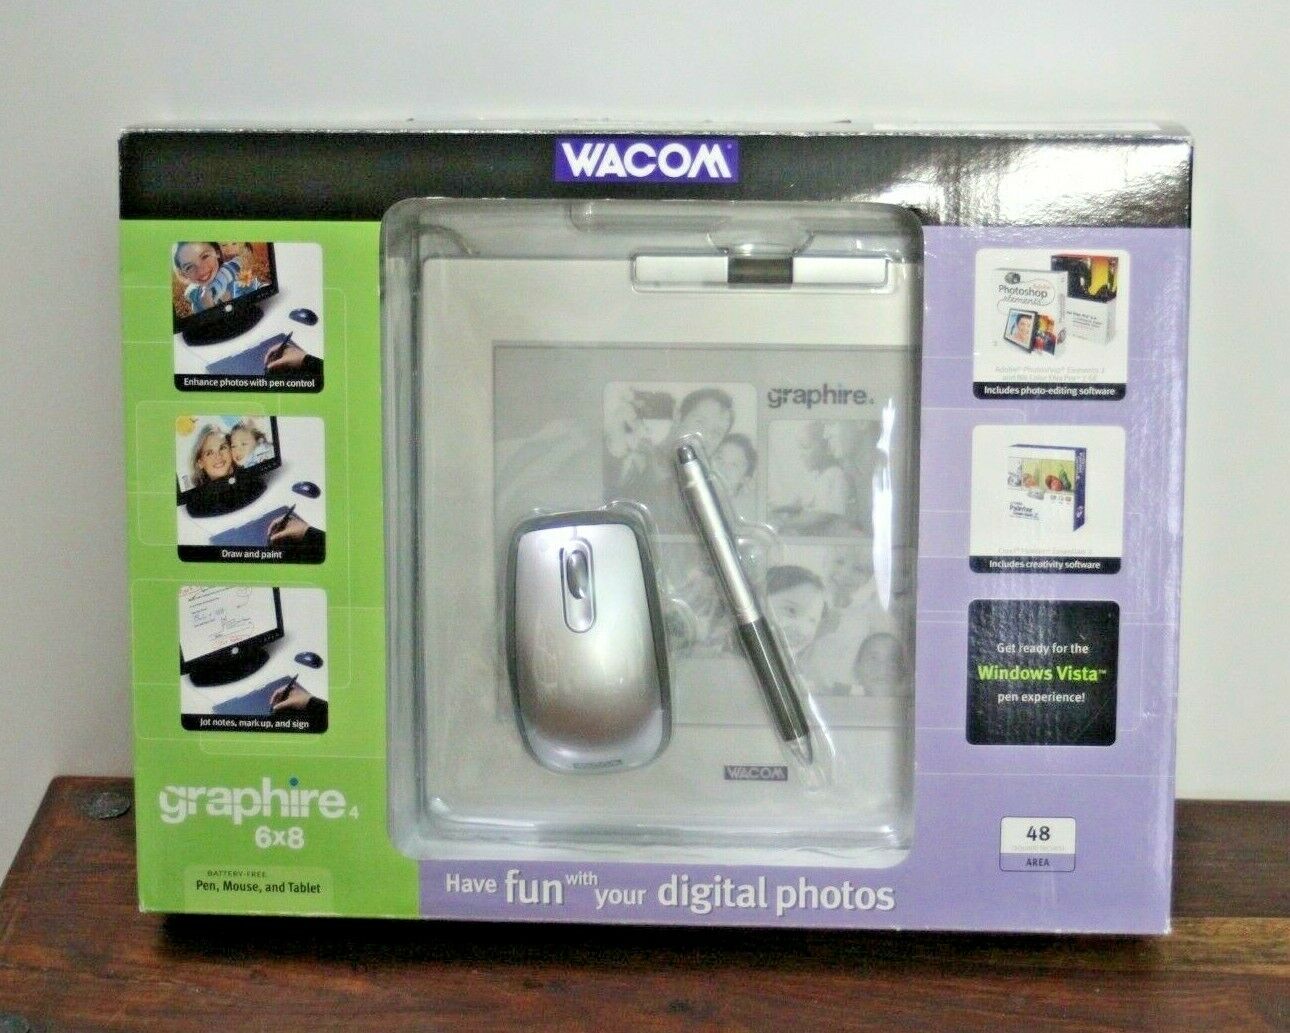 Wacom Graphire4 6x8 USB Graphics Drawing Tablet - Mouse - Pen - Free Shipping